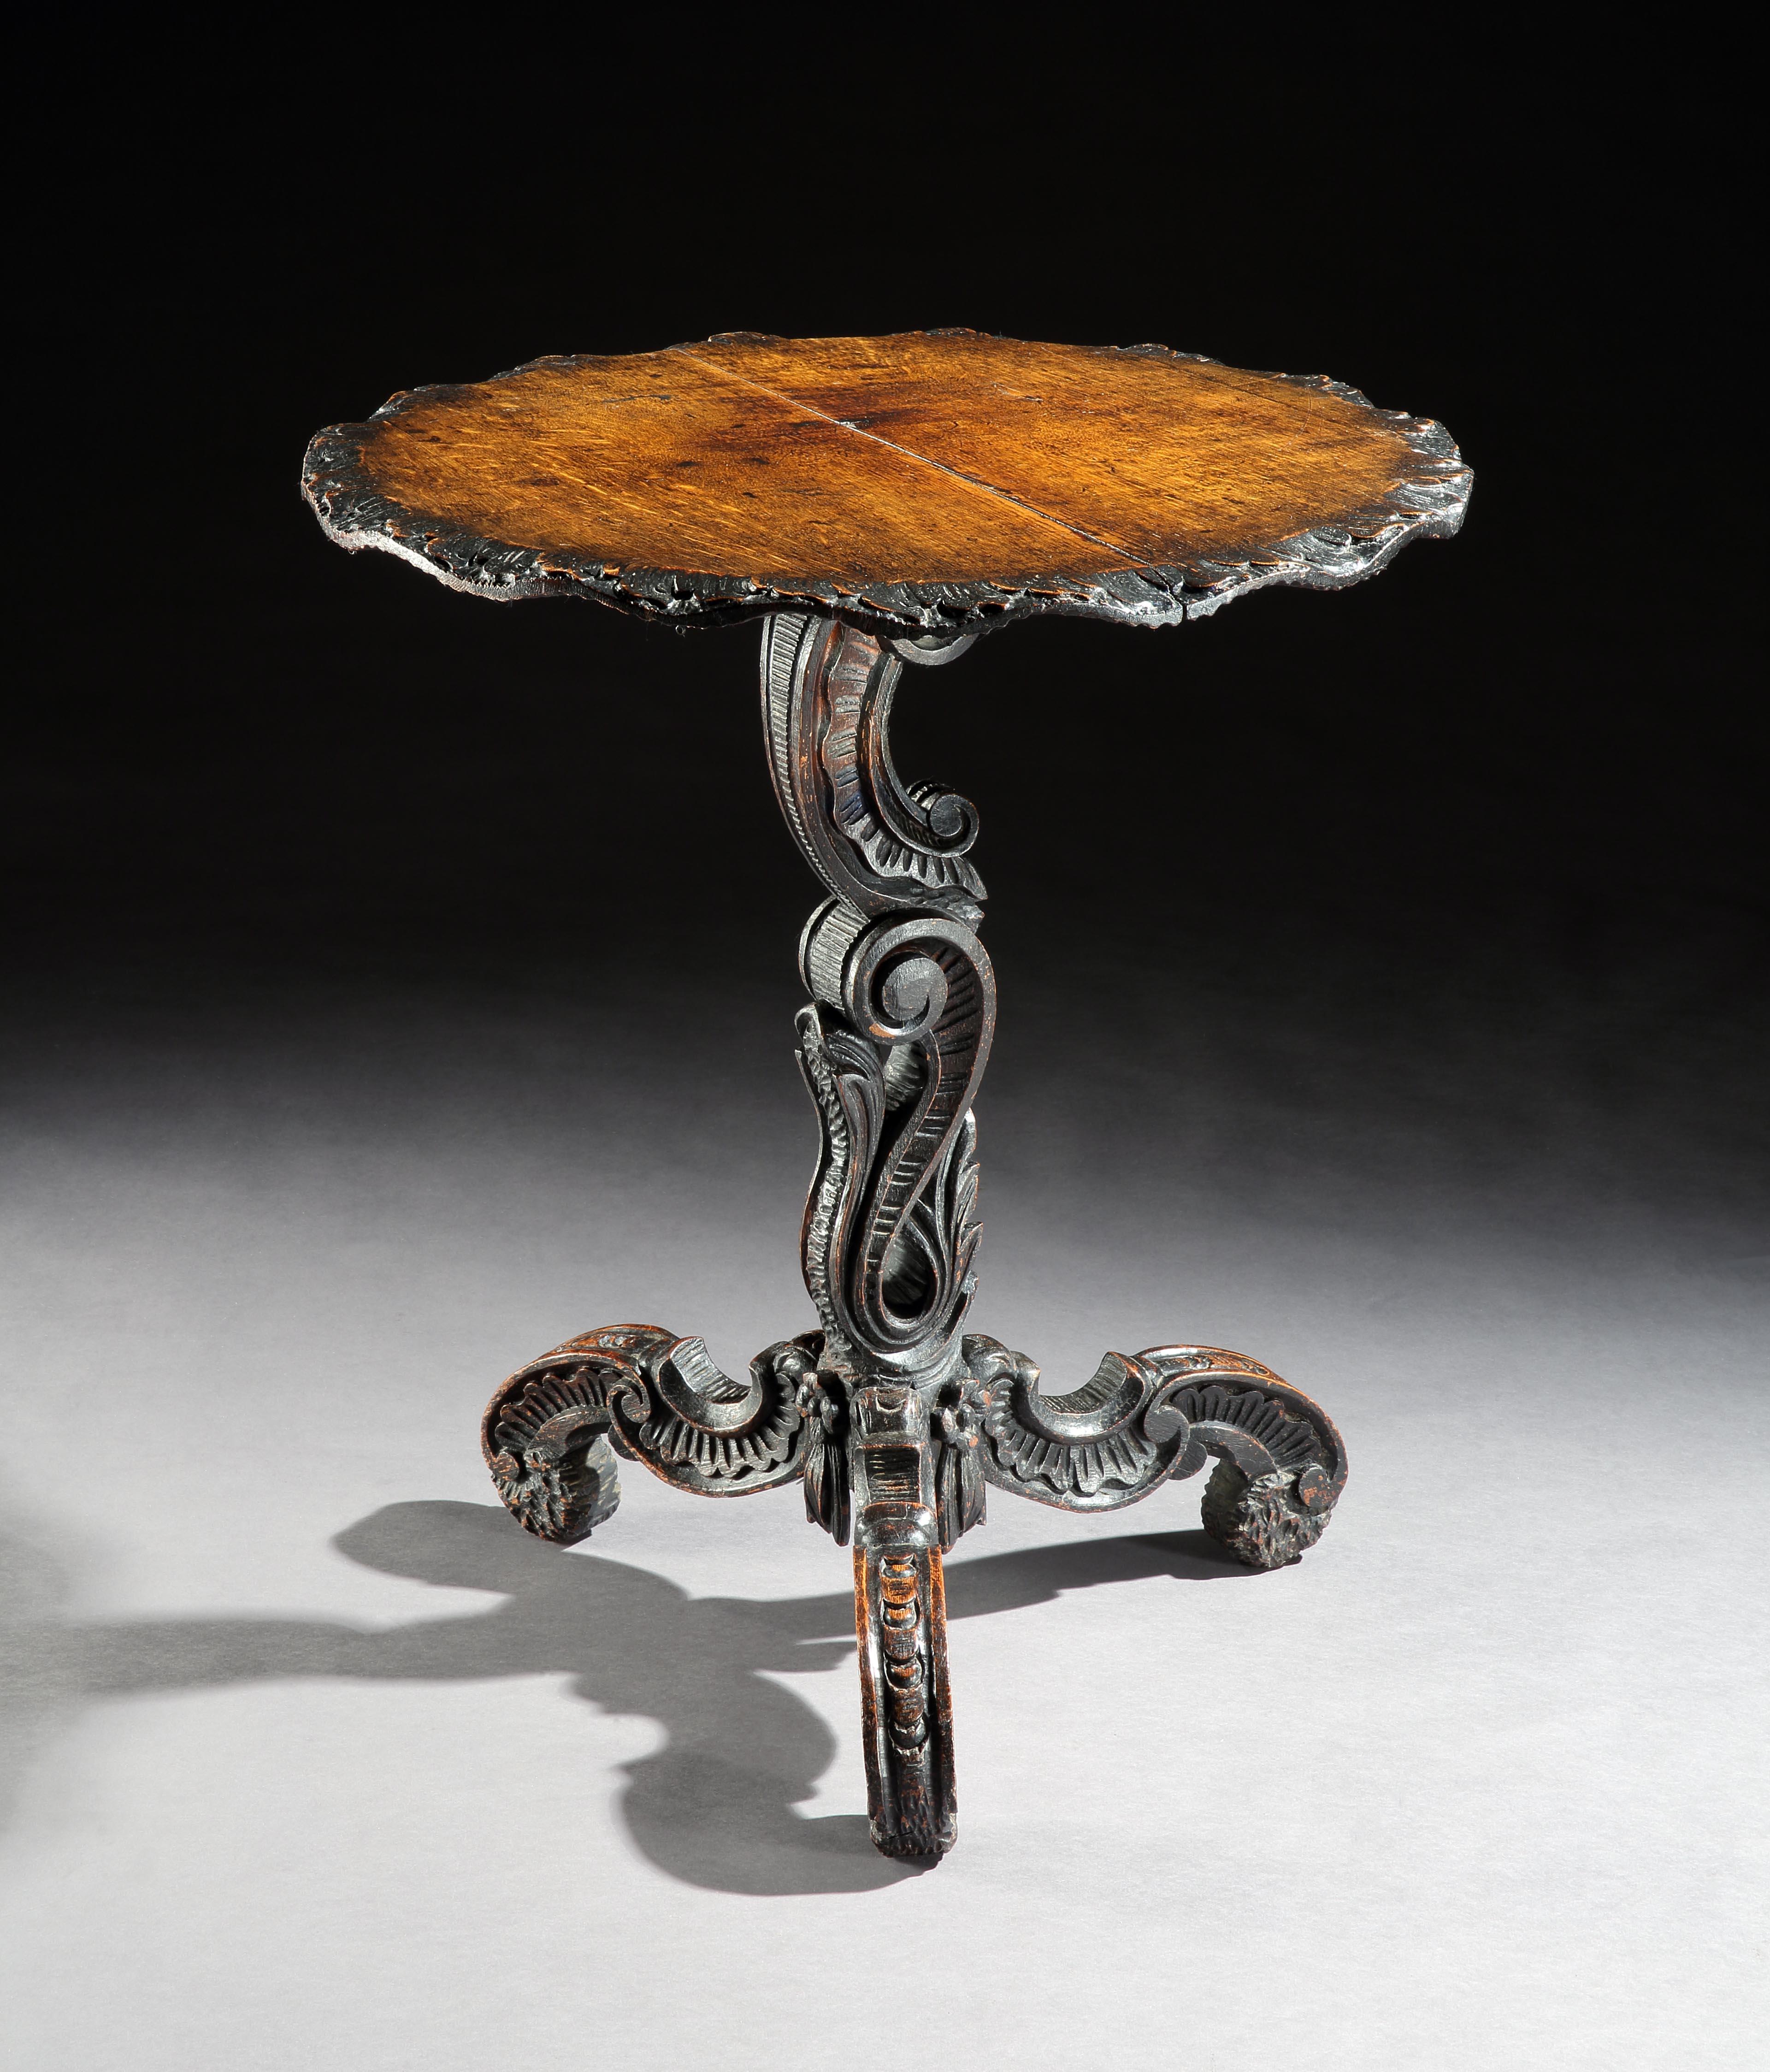 Lovely, carved detailing the the edge of the top and rococo scrollwork stem and feet which incorporate shell detailing inside the scrolls
This table is crisply carved with characteristic grotto ornamentation creating the form with the scrollwork